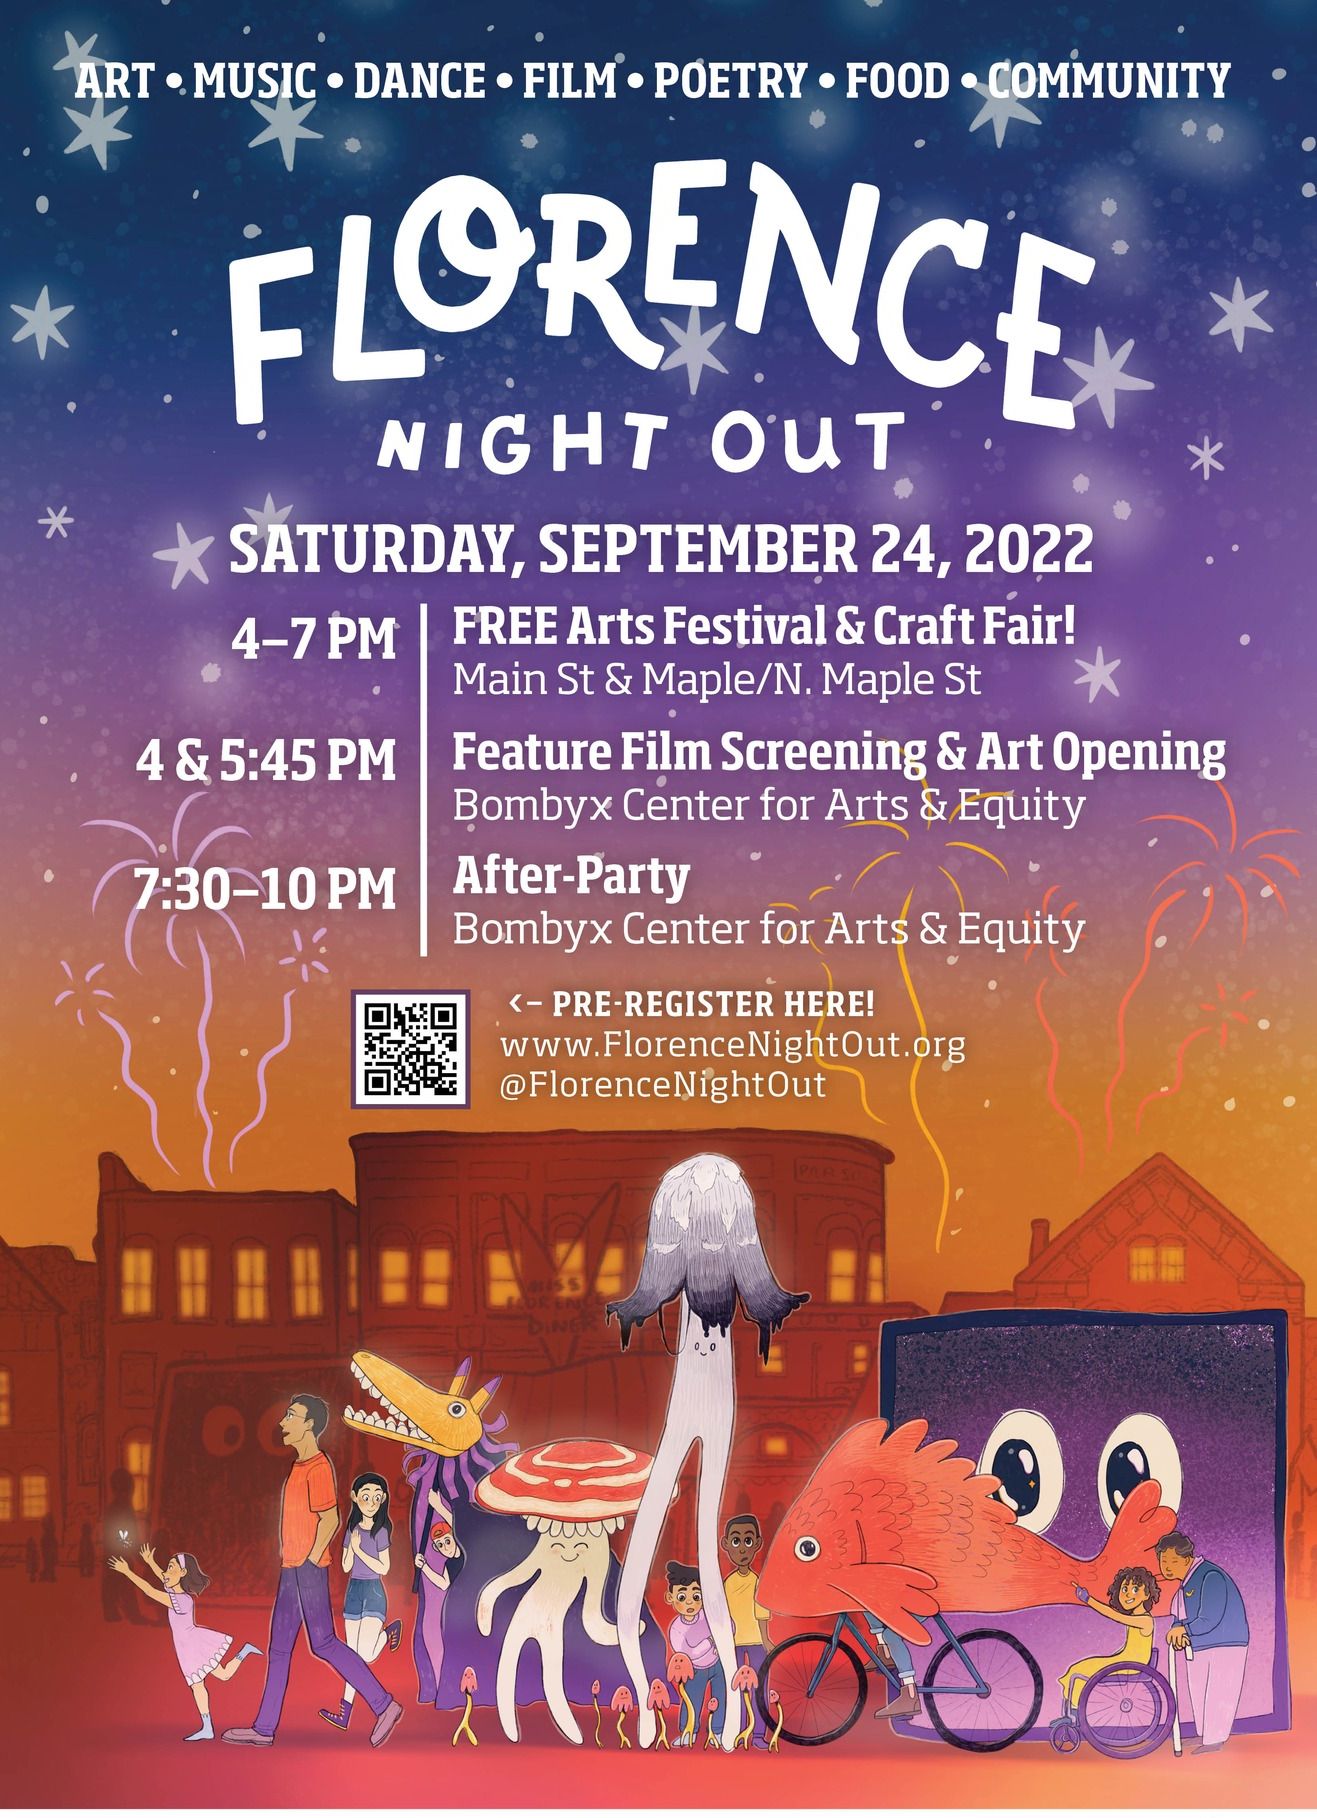 Florence Night Out 2022 Saturday, September 24th Northampton MA Events